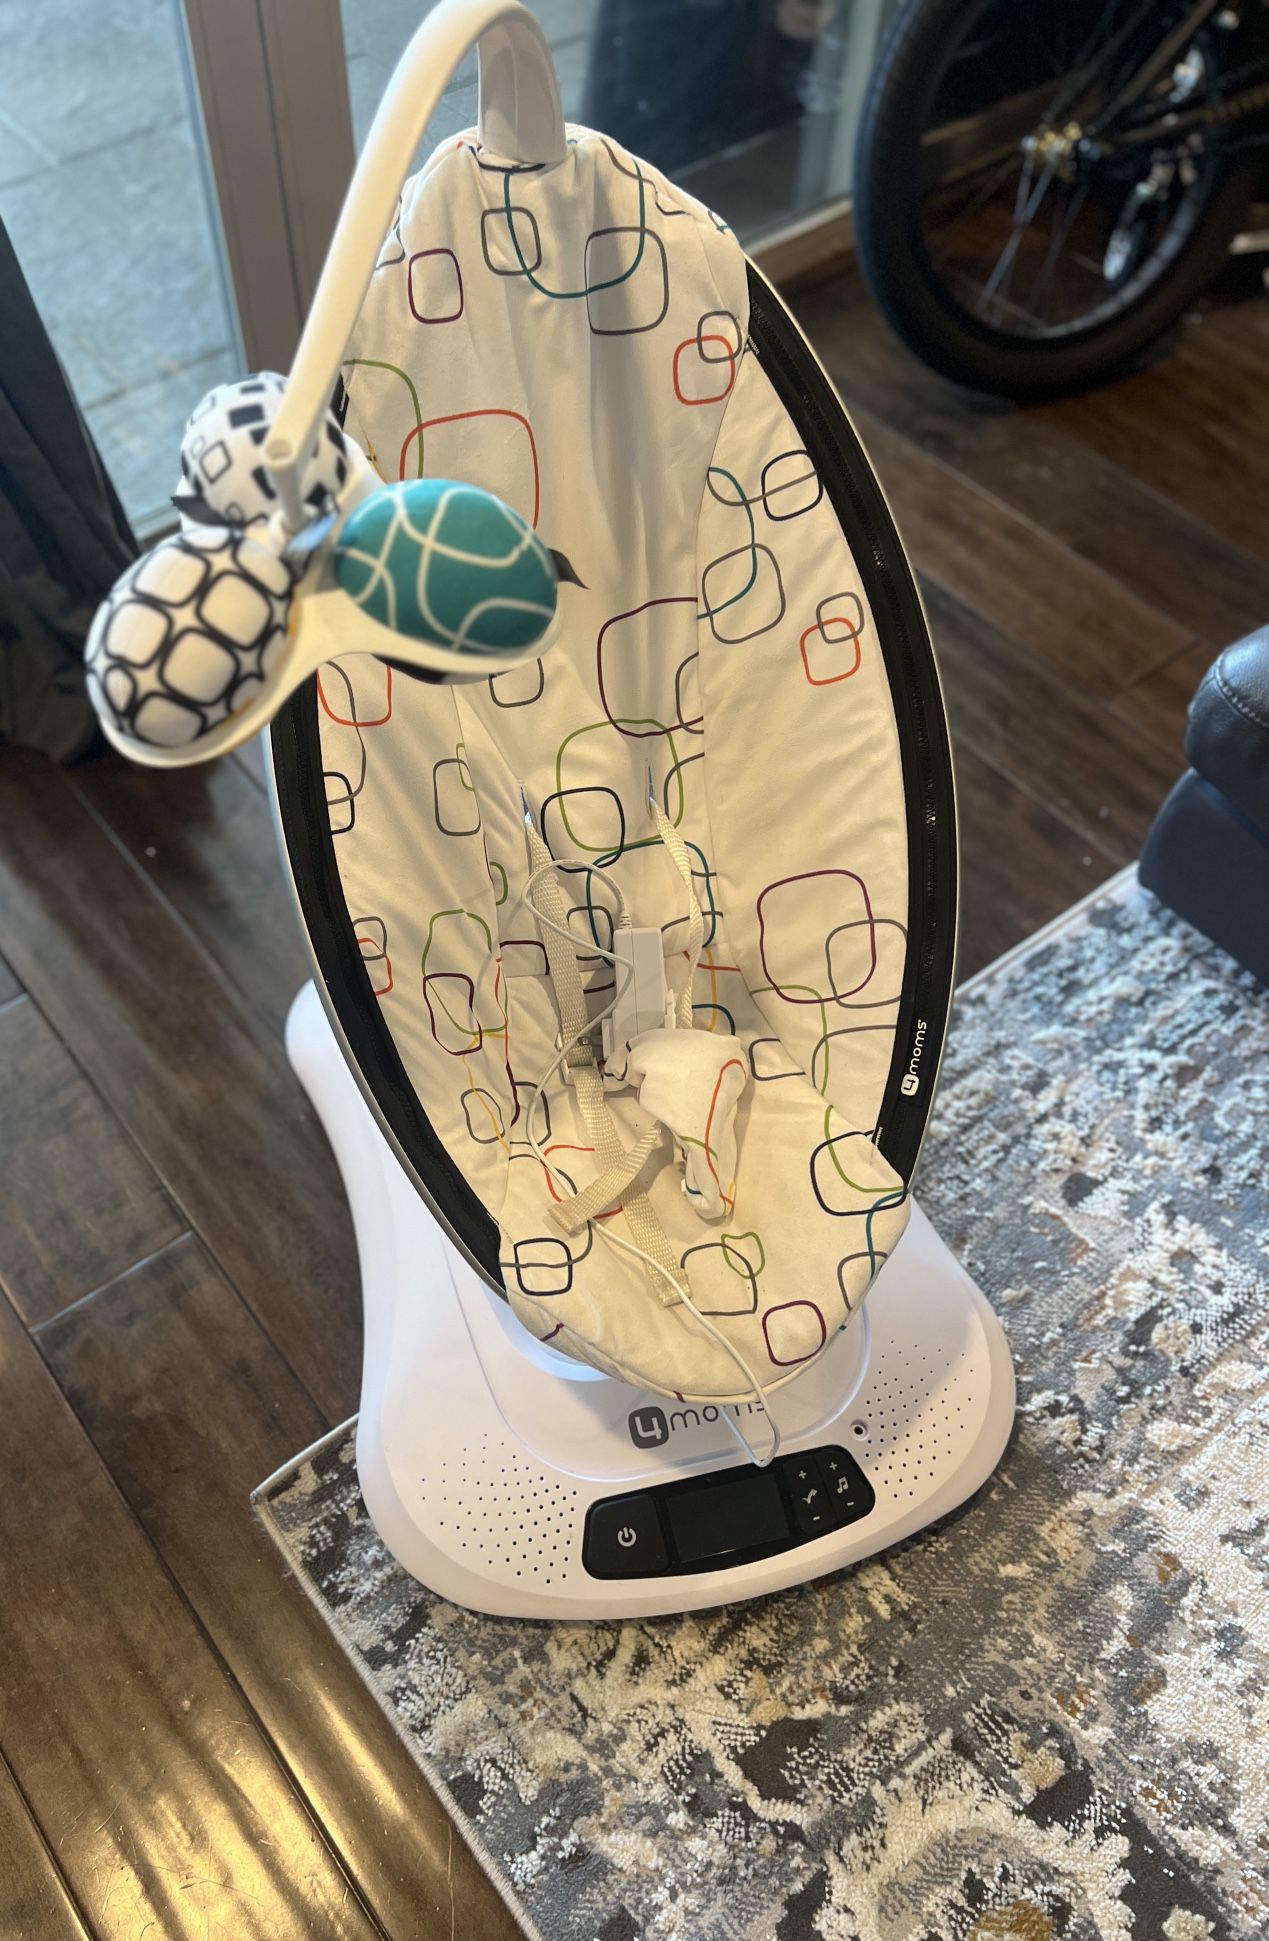 4moms Bouncer 4moms MamaRoo Multi-Motion Baby Swing, Bluetooth Enabled with 5 Unique Motions